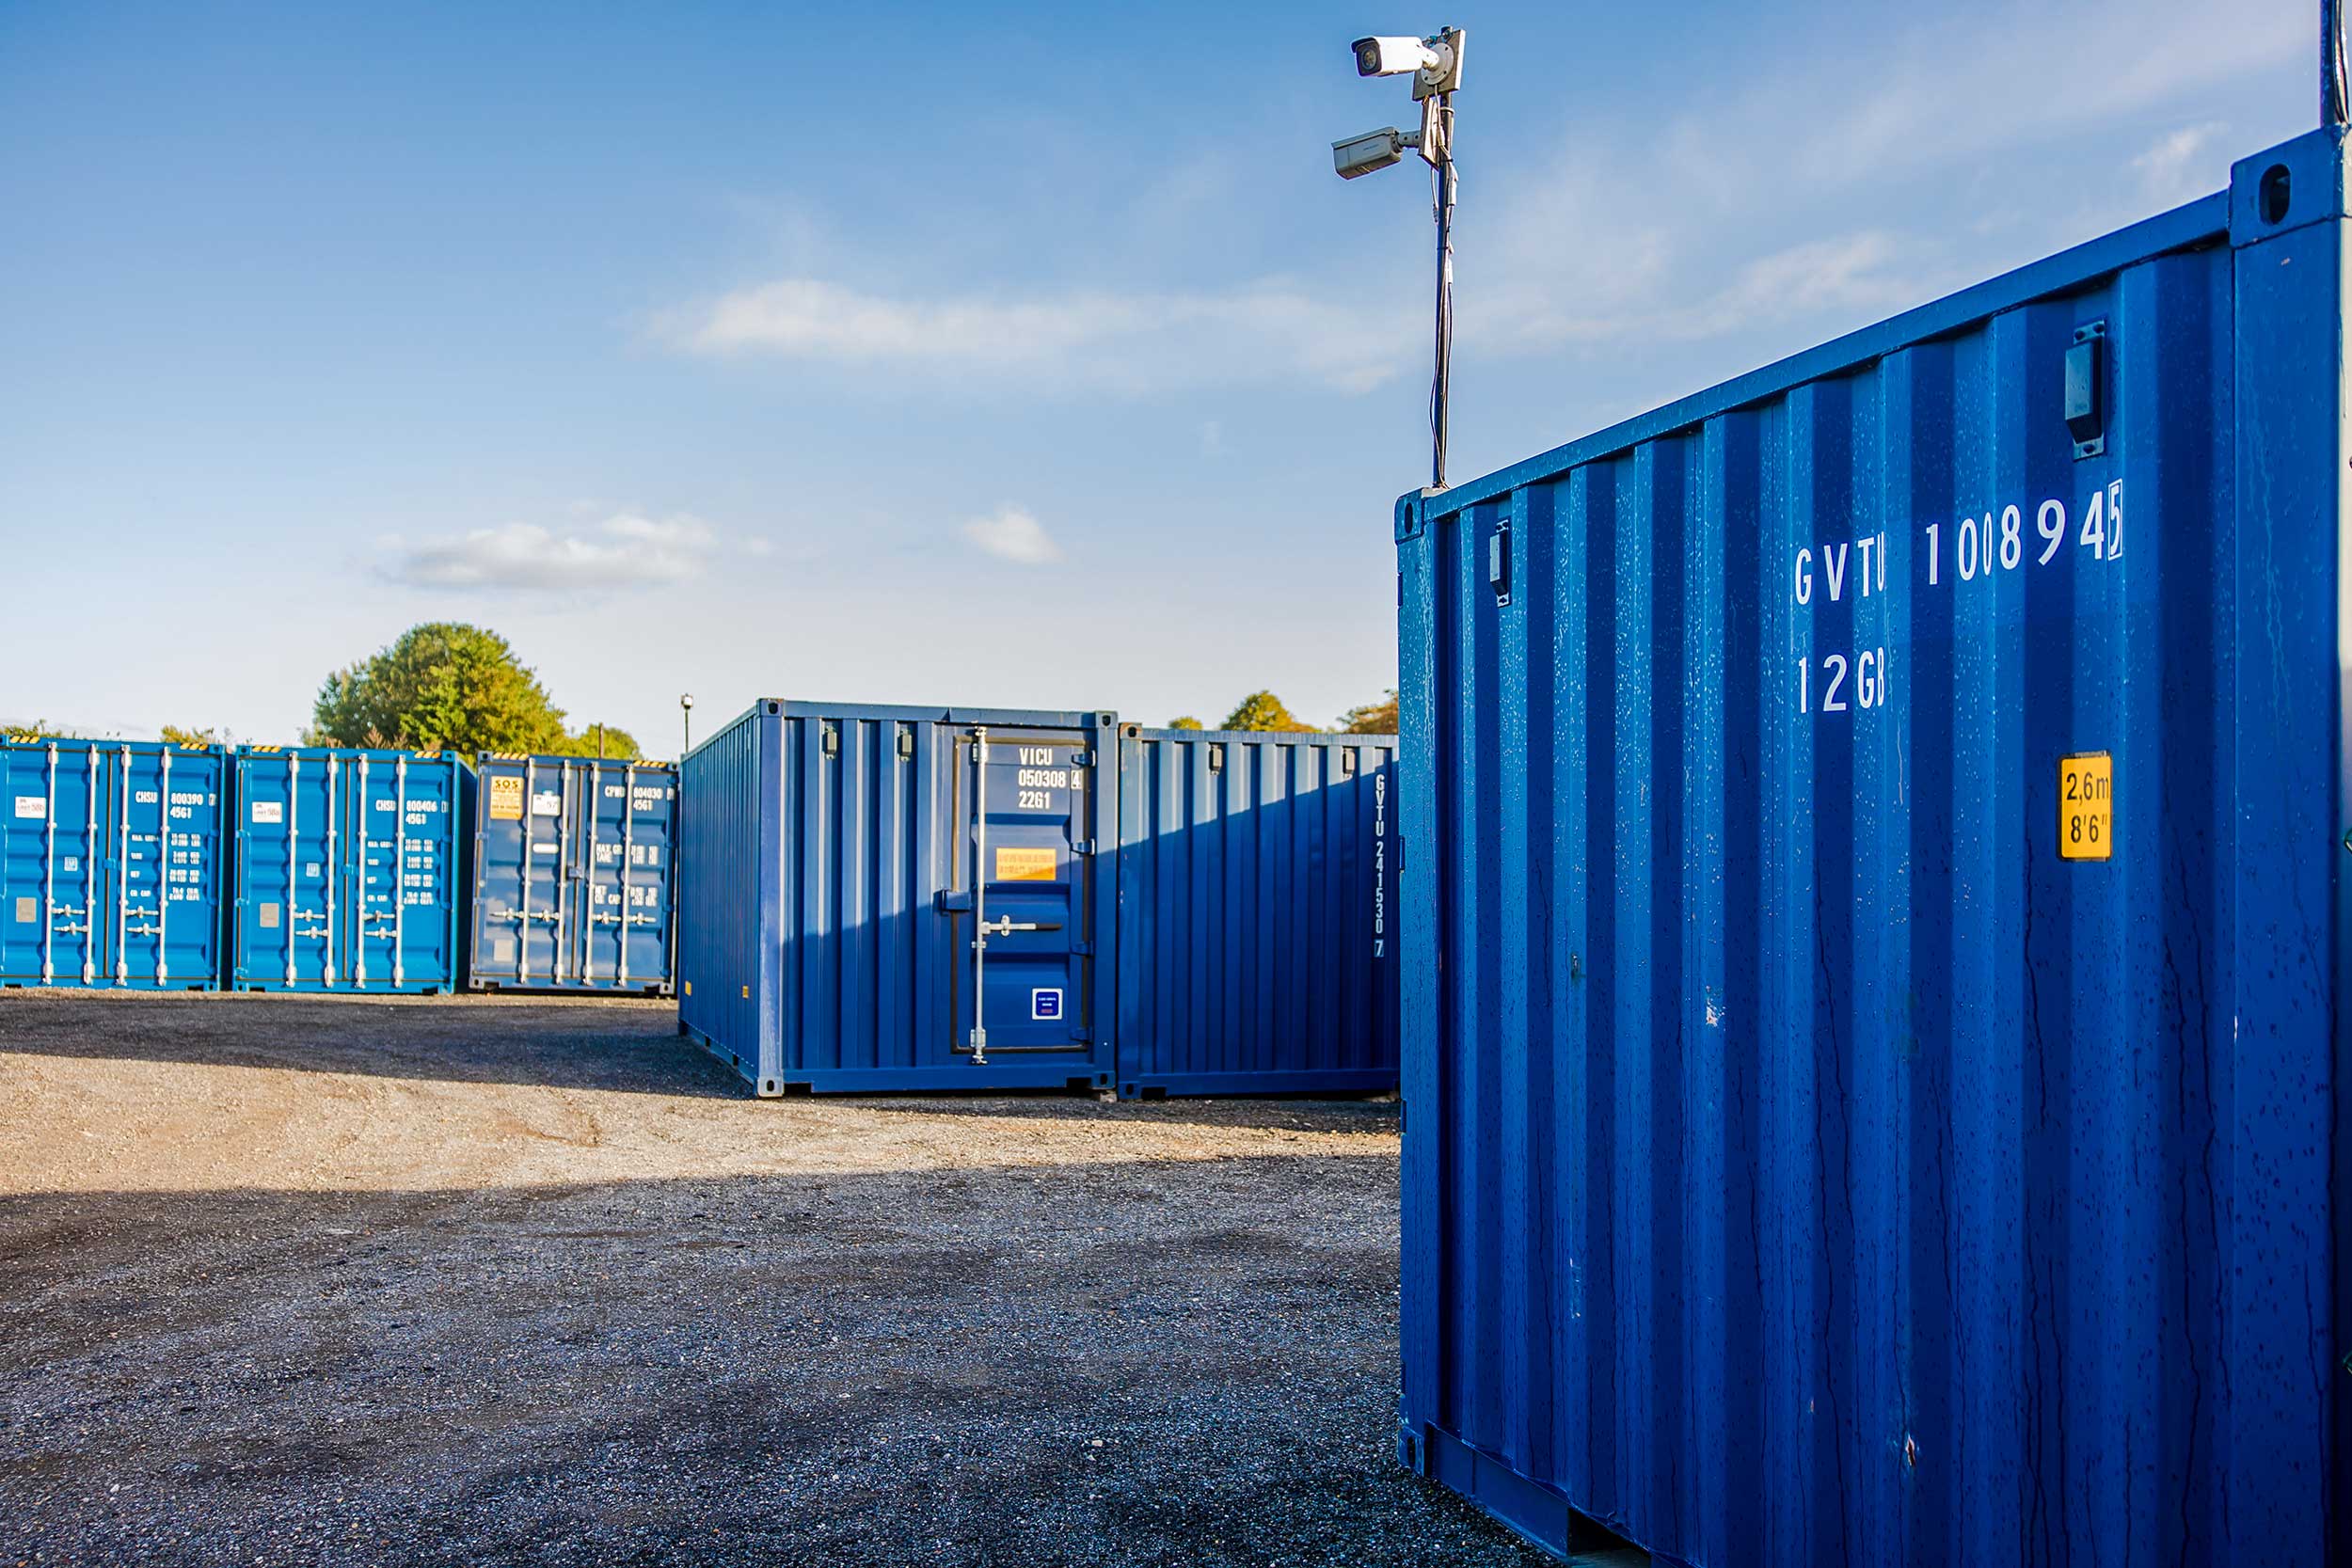 A large open area filled with numerous blue storage containers and cctv equipment.